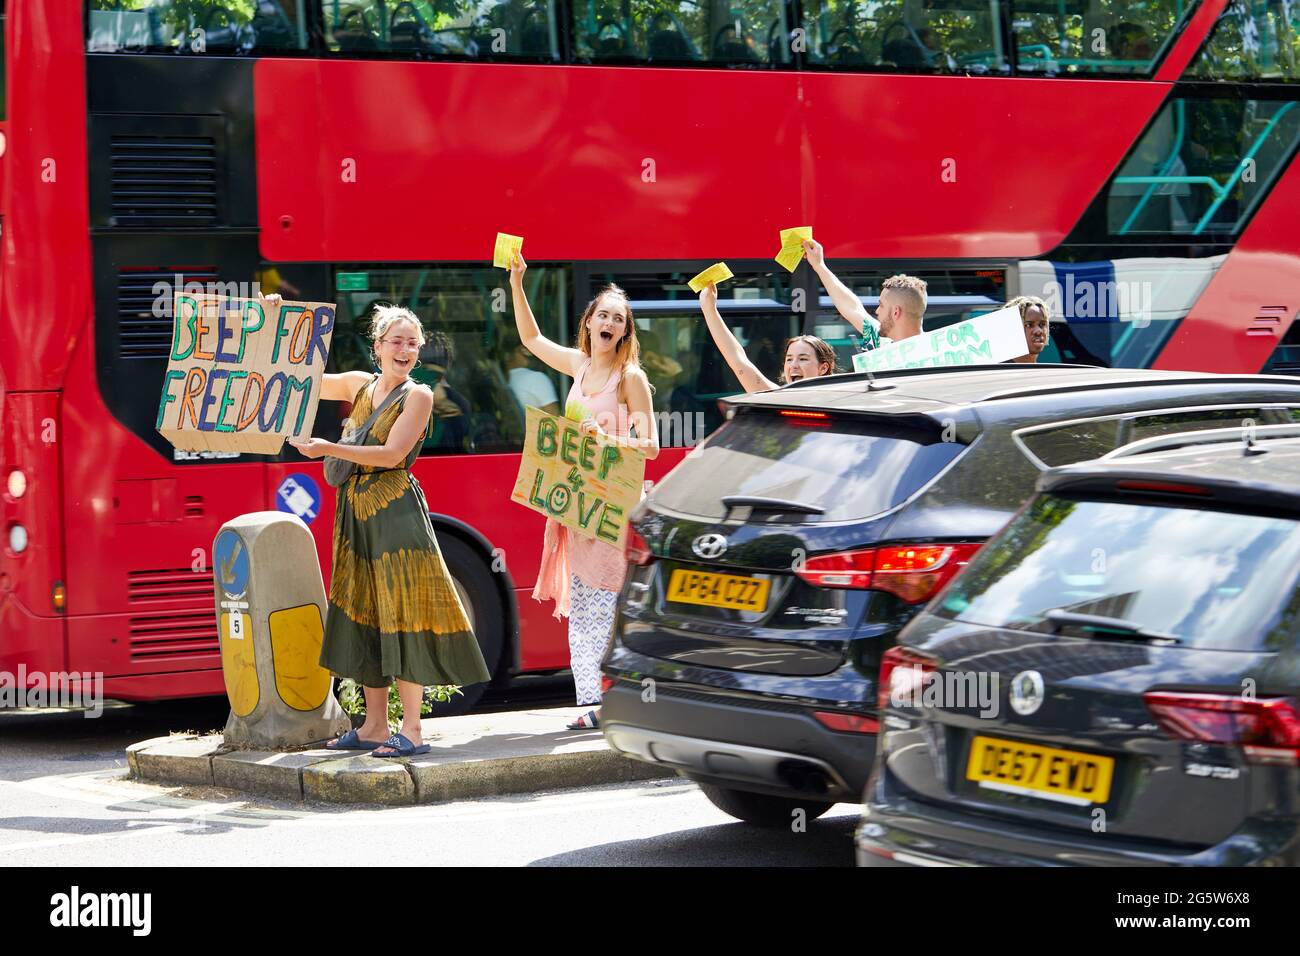 London, UK - 15 June 2021: Protestors from the lovedown anti-lockdown camp on Shepherds Bush Green gain support for their cause from passing motorists. Stock Photo